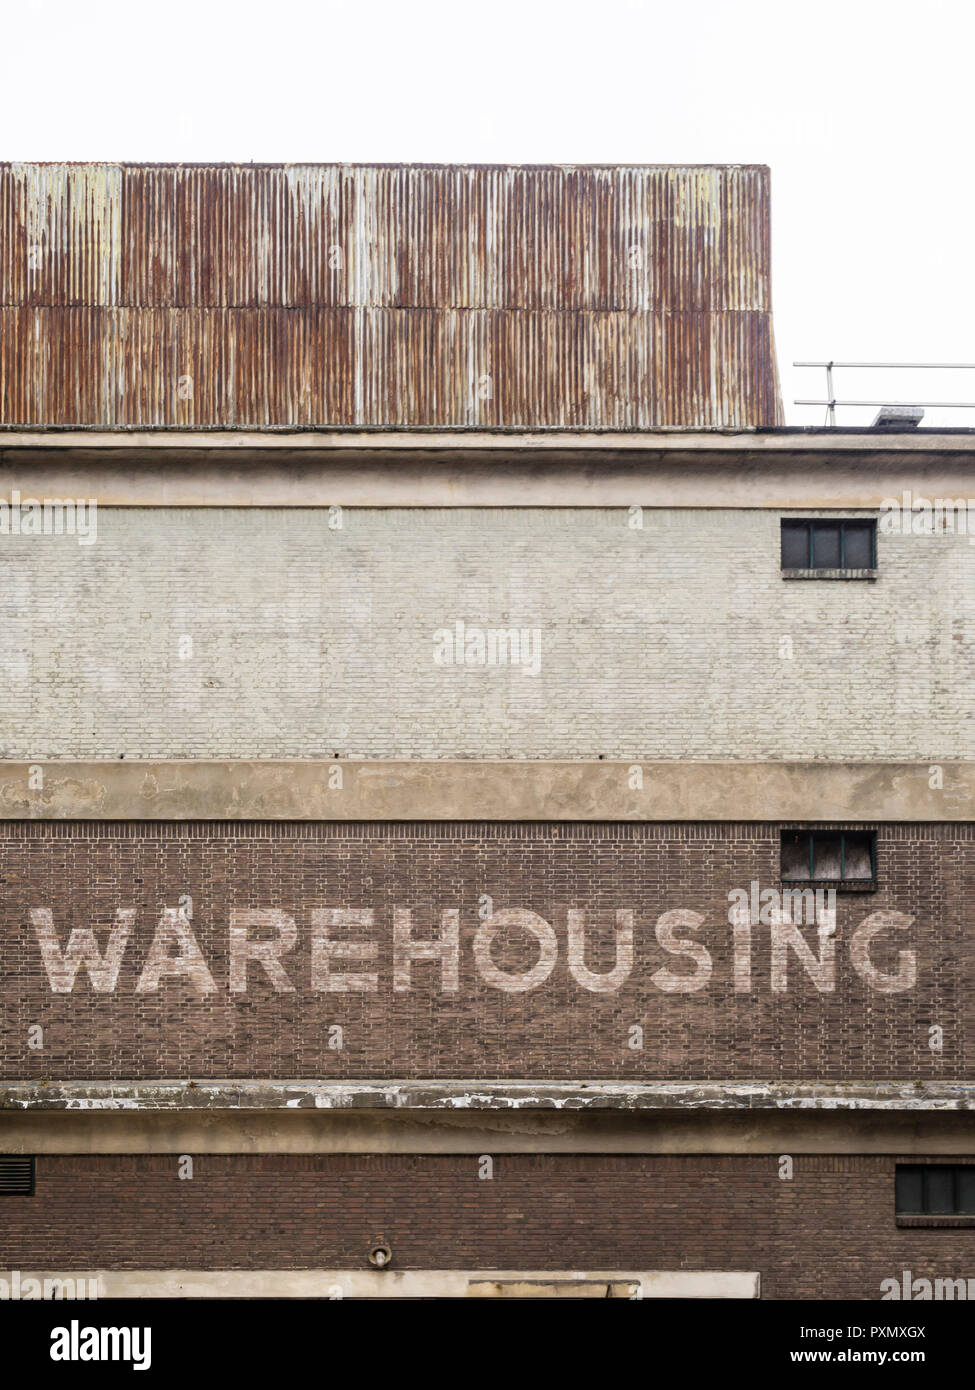 Old brick wall in Rotterdam with the word 'Warehousing' painted on it Stock Photo